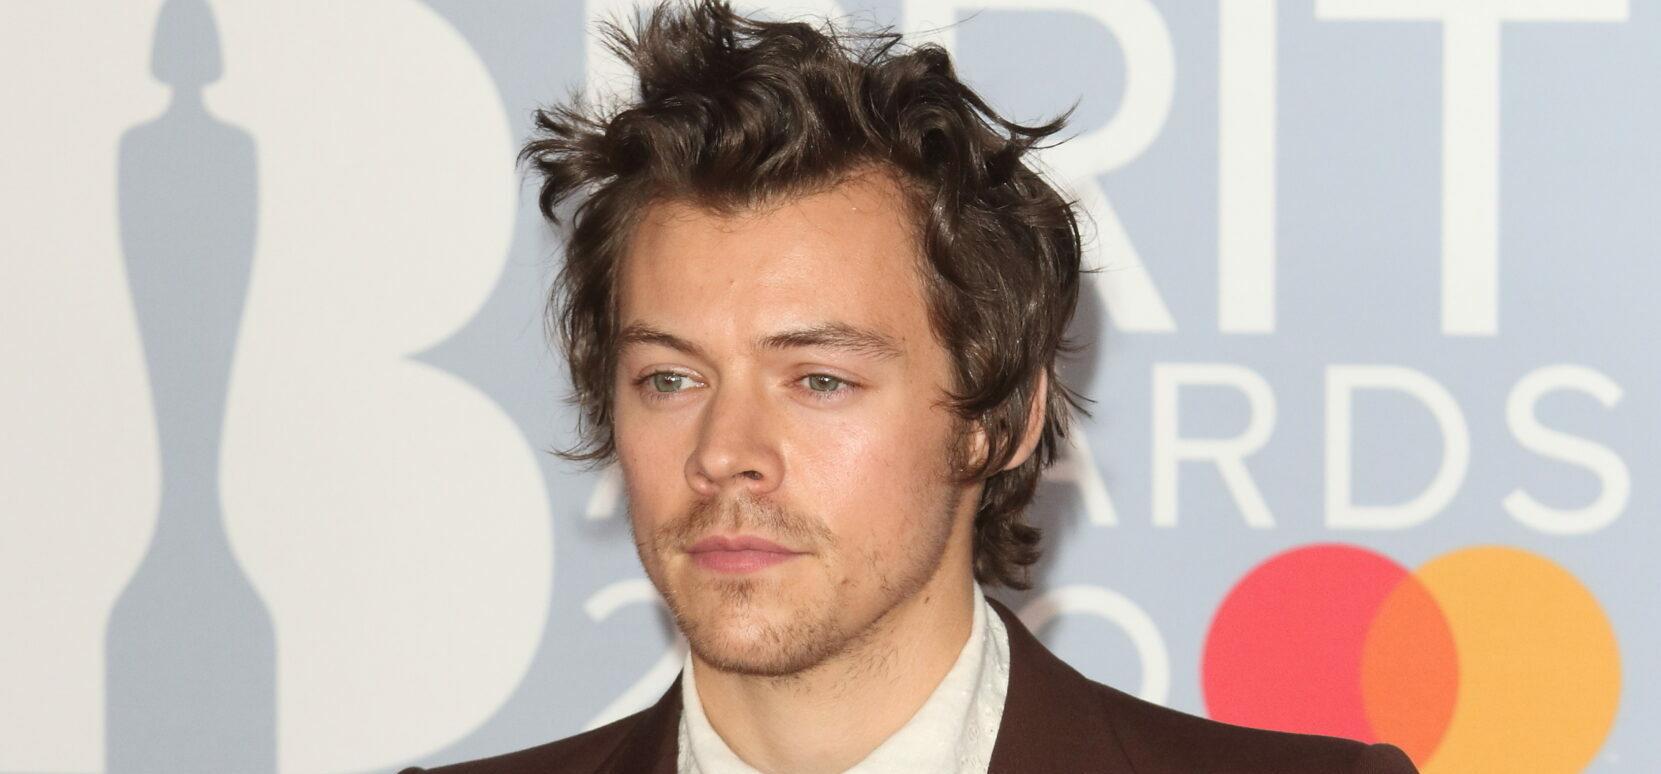 Harry Styles Spotted Sharing An Intimate Hug With A Brunette Lady Amid Split From Olivia Wilde